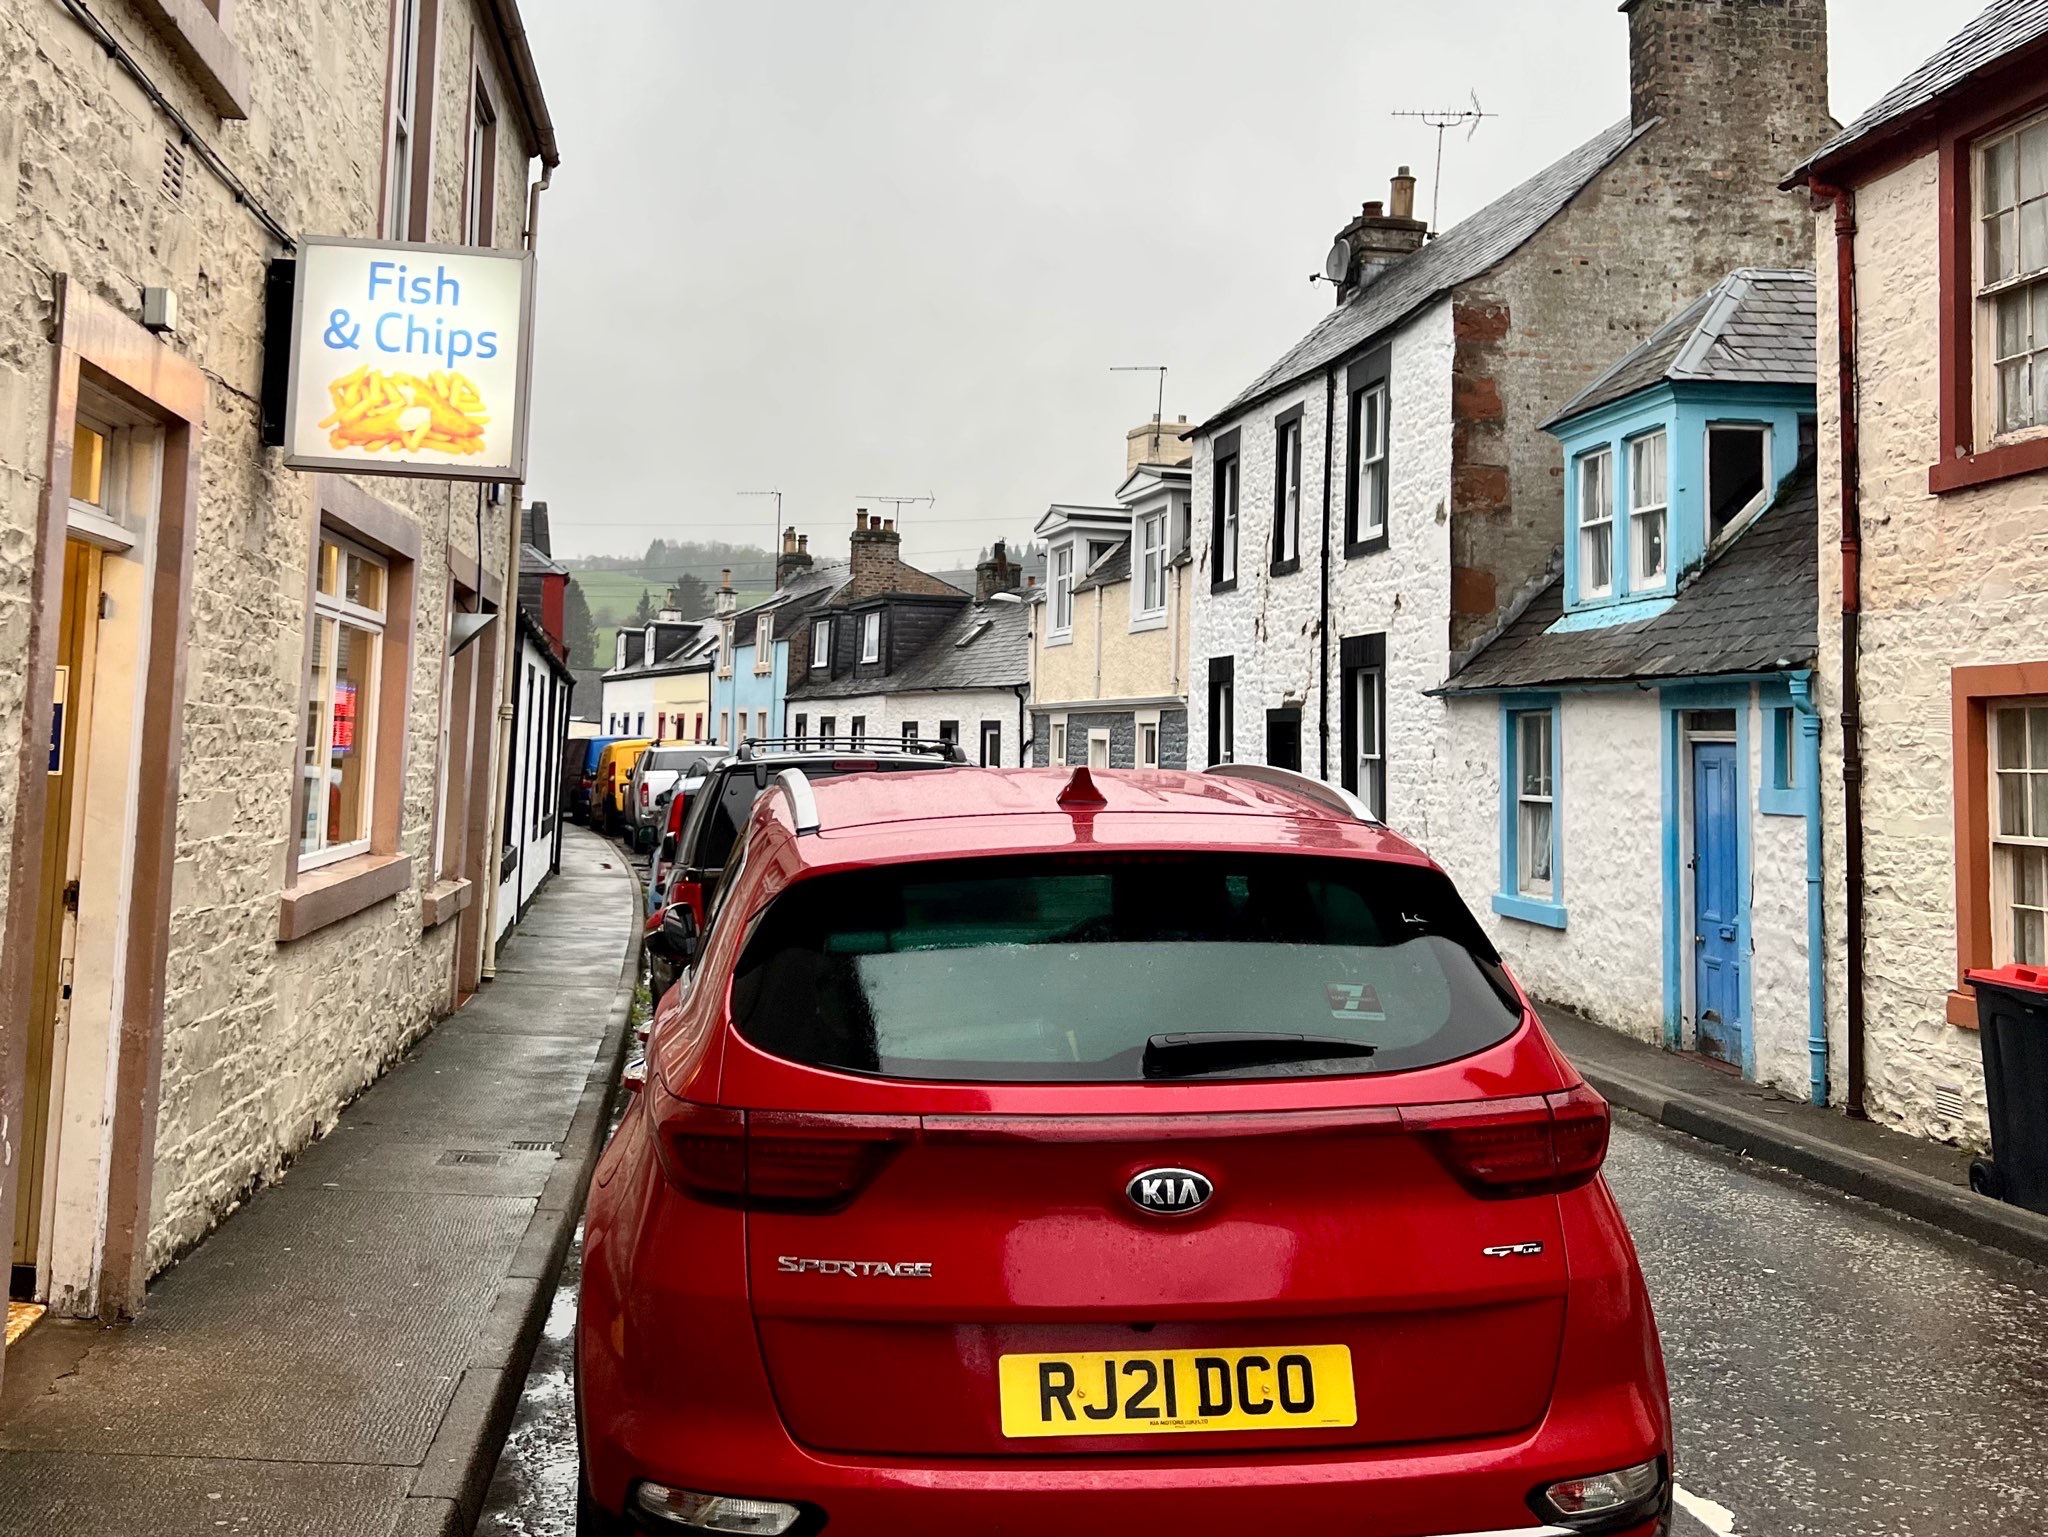 Scotland At Last: Photo of a street in Moffet Scotland